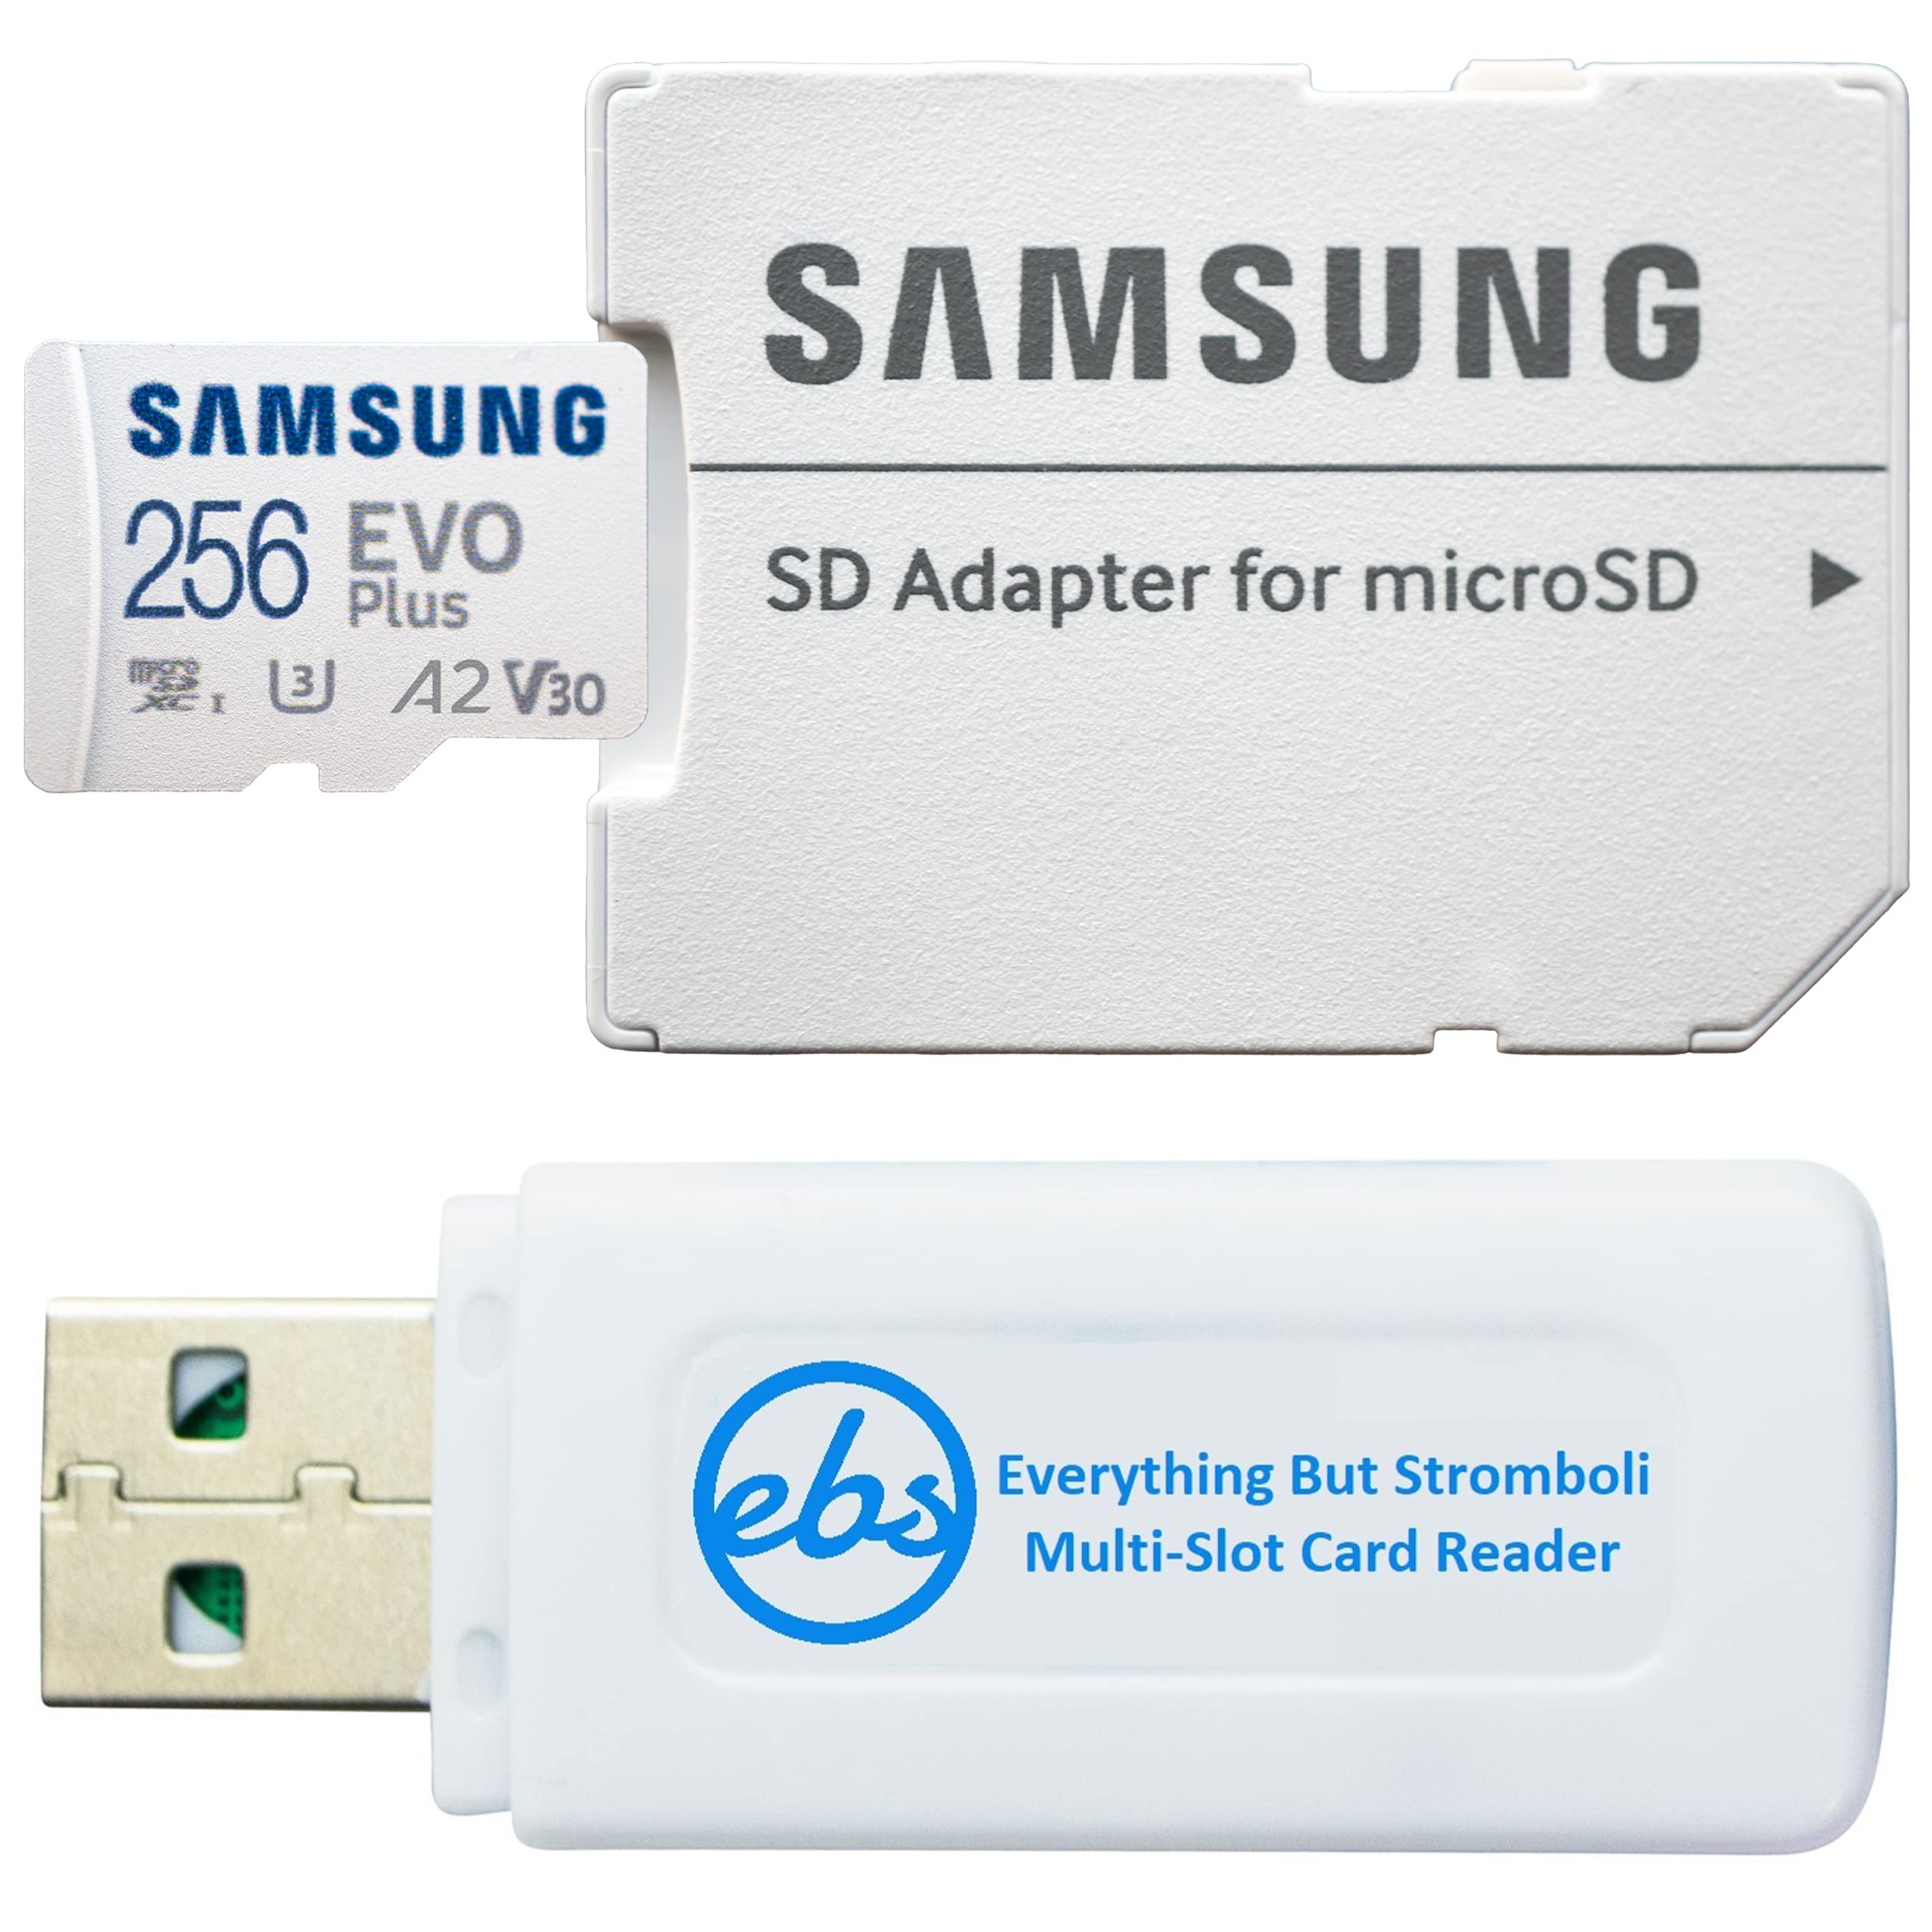 Samsung 256GB Micro SDXC EVO Plus Memory Card with Adapter Works with Samsung A22 A03 Core A03s Phone MB-MC256 Class 10 U